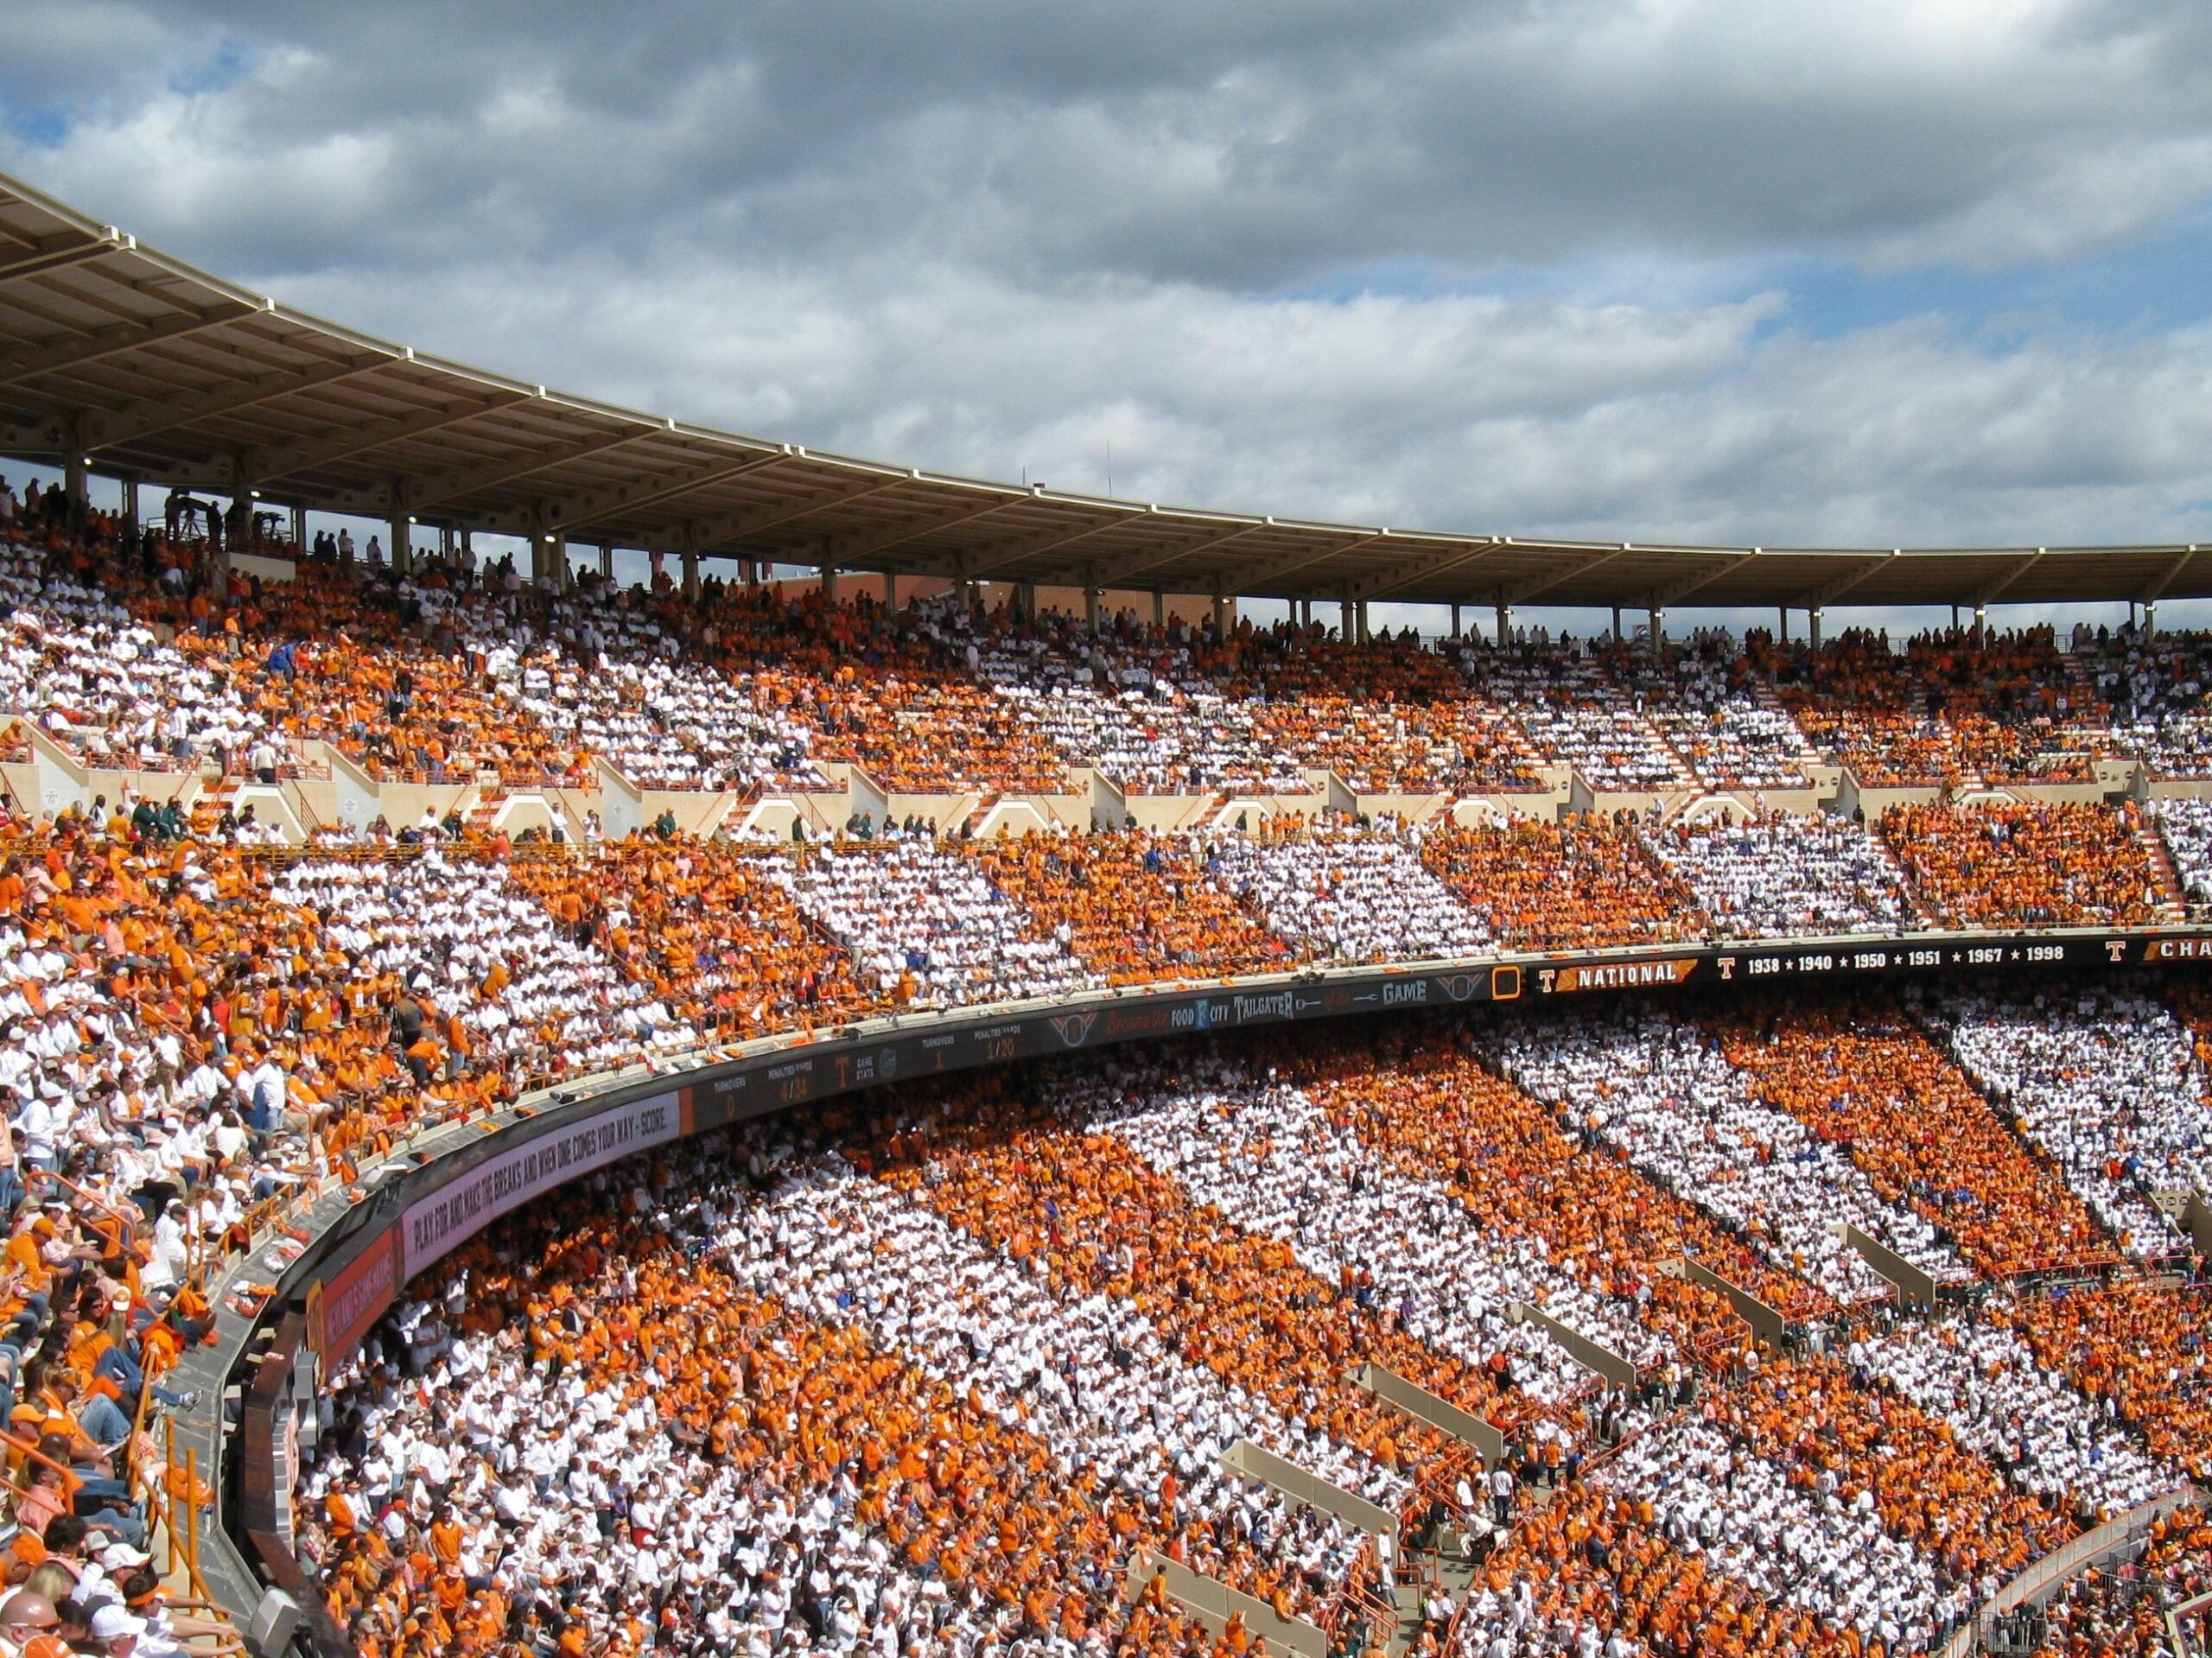 A football stadium filled with fans dressed in orange and white.